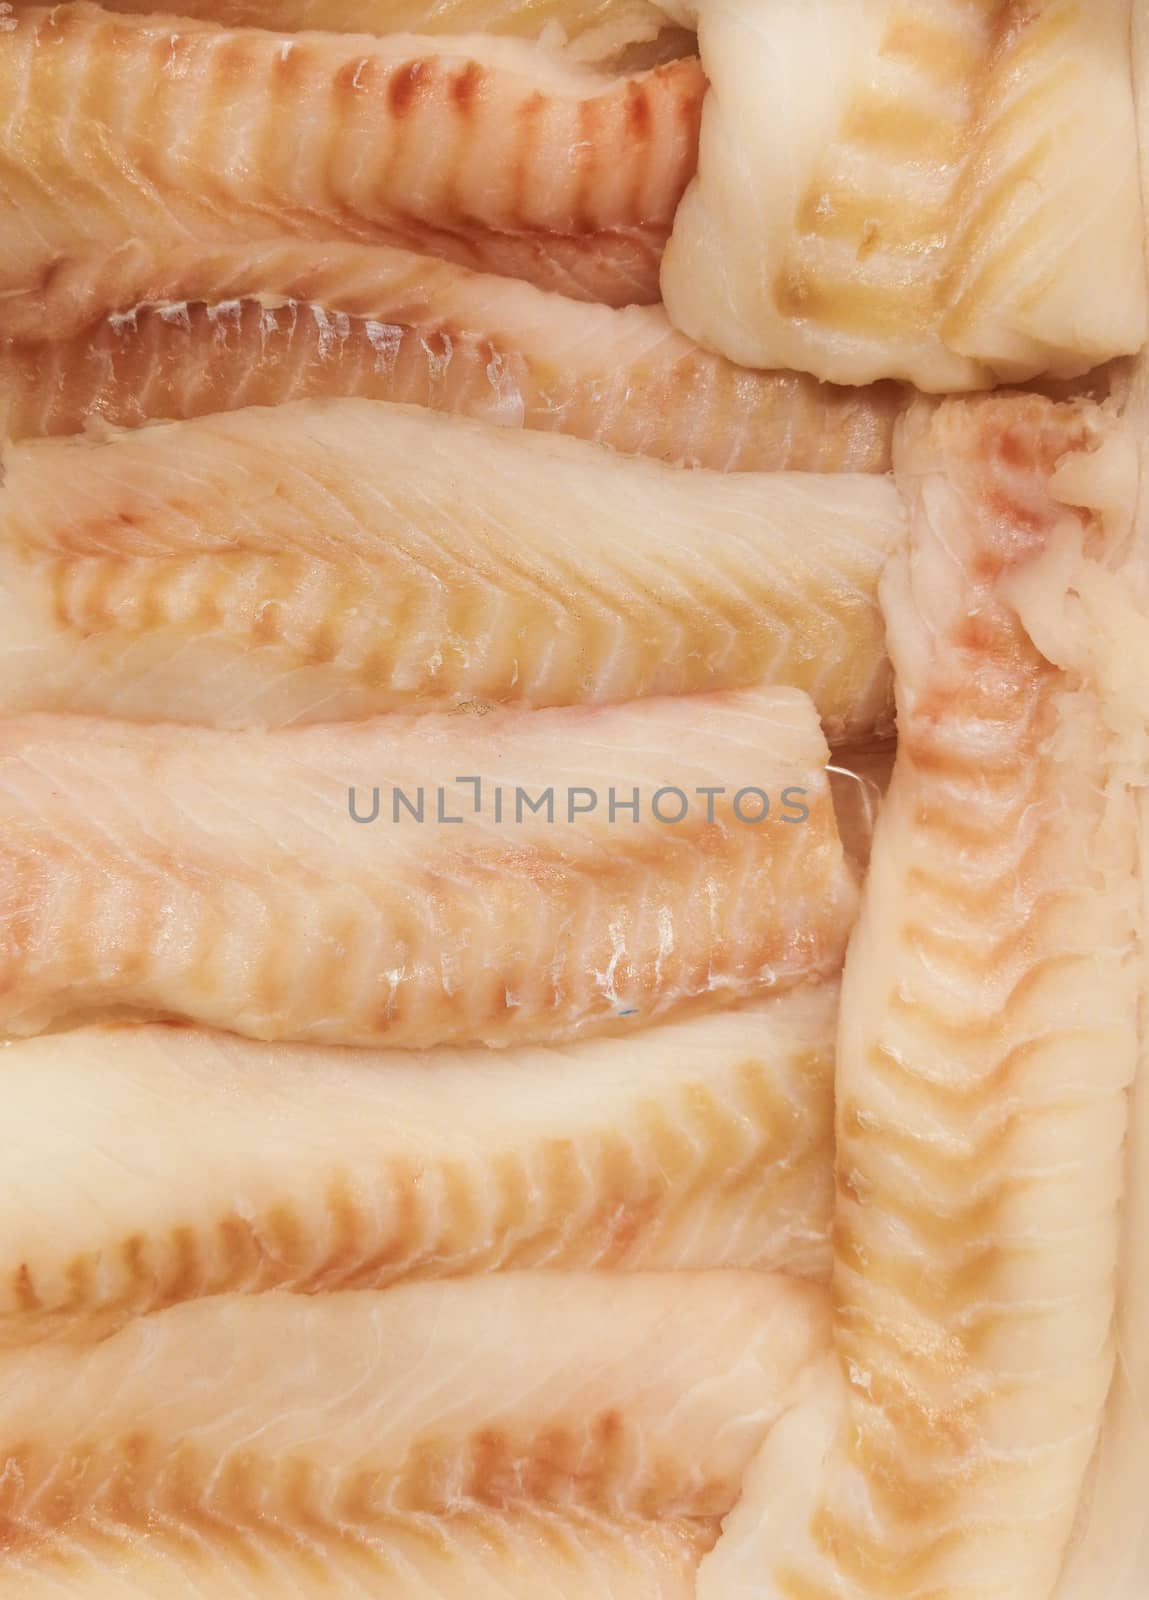 Fish fillet lying on ice in a shop window, store counter or supermarket by galinasharapova